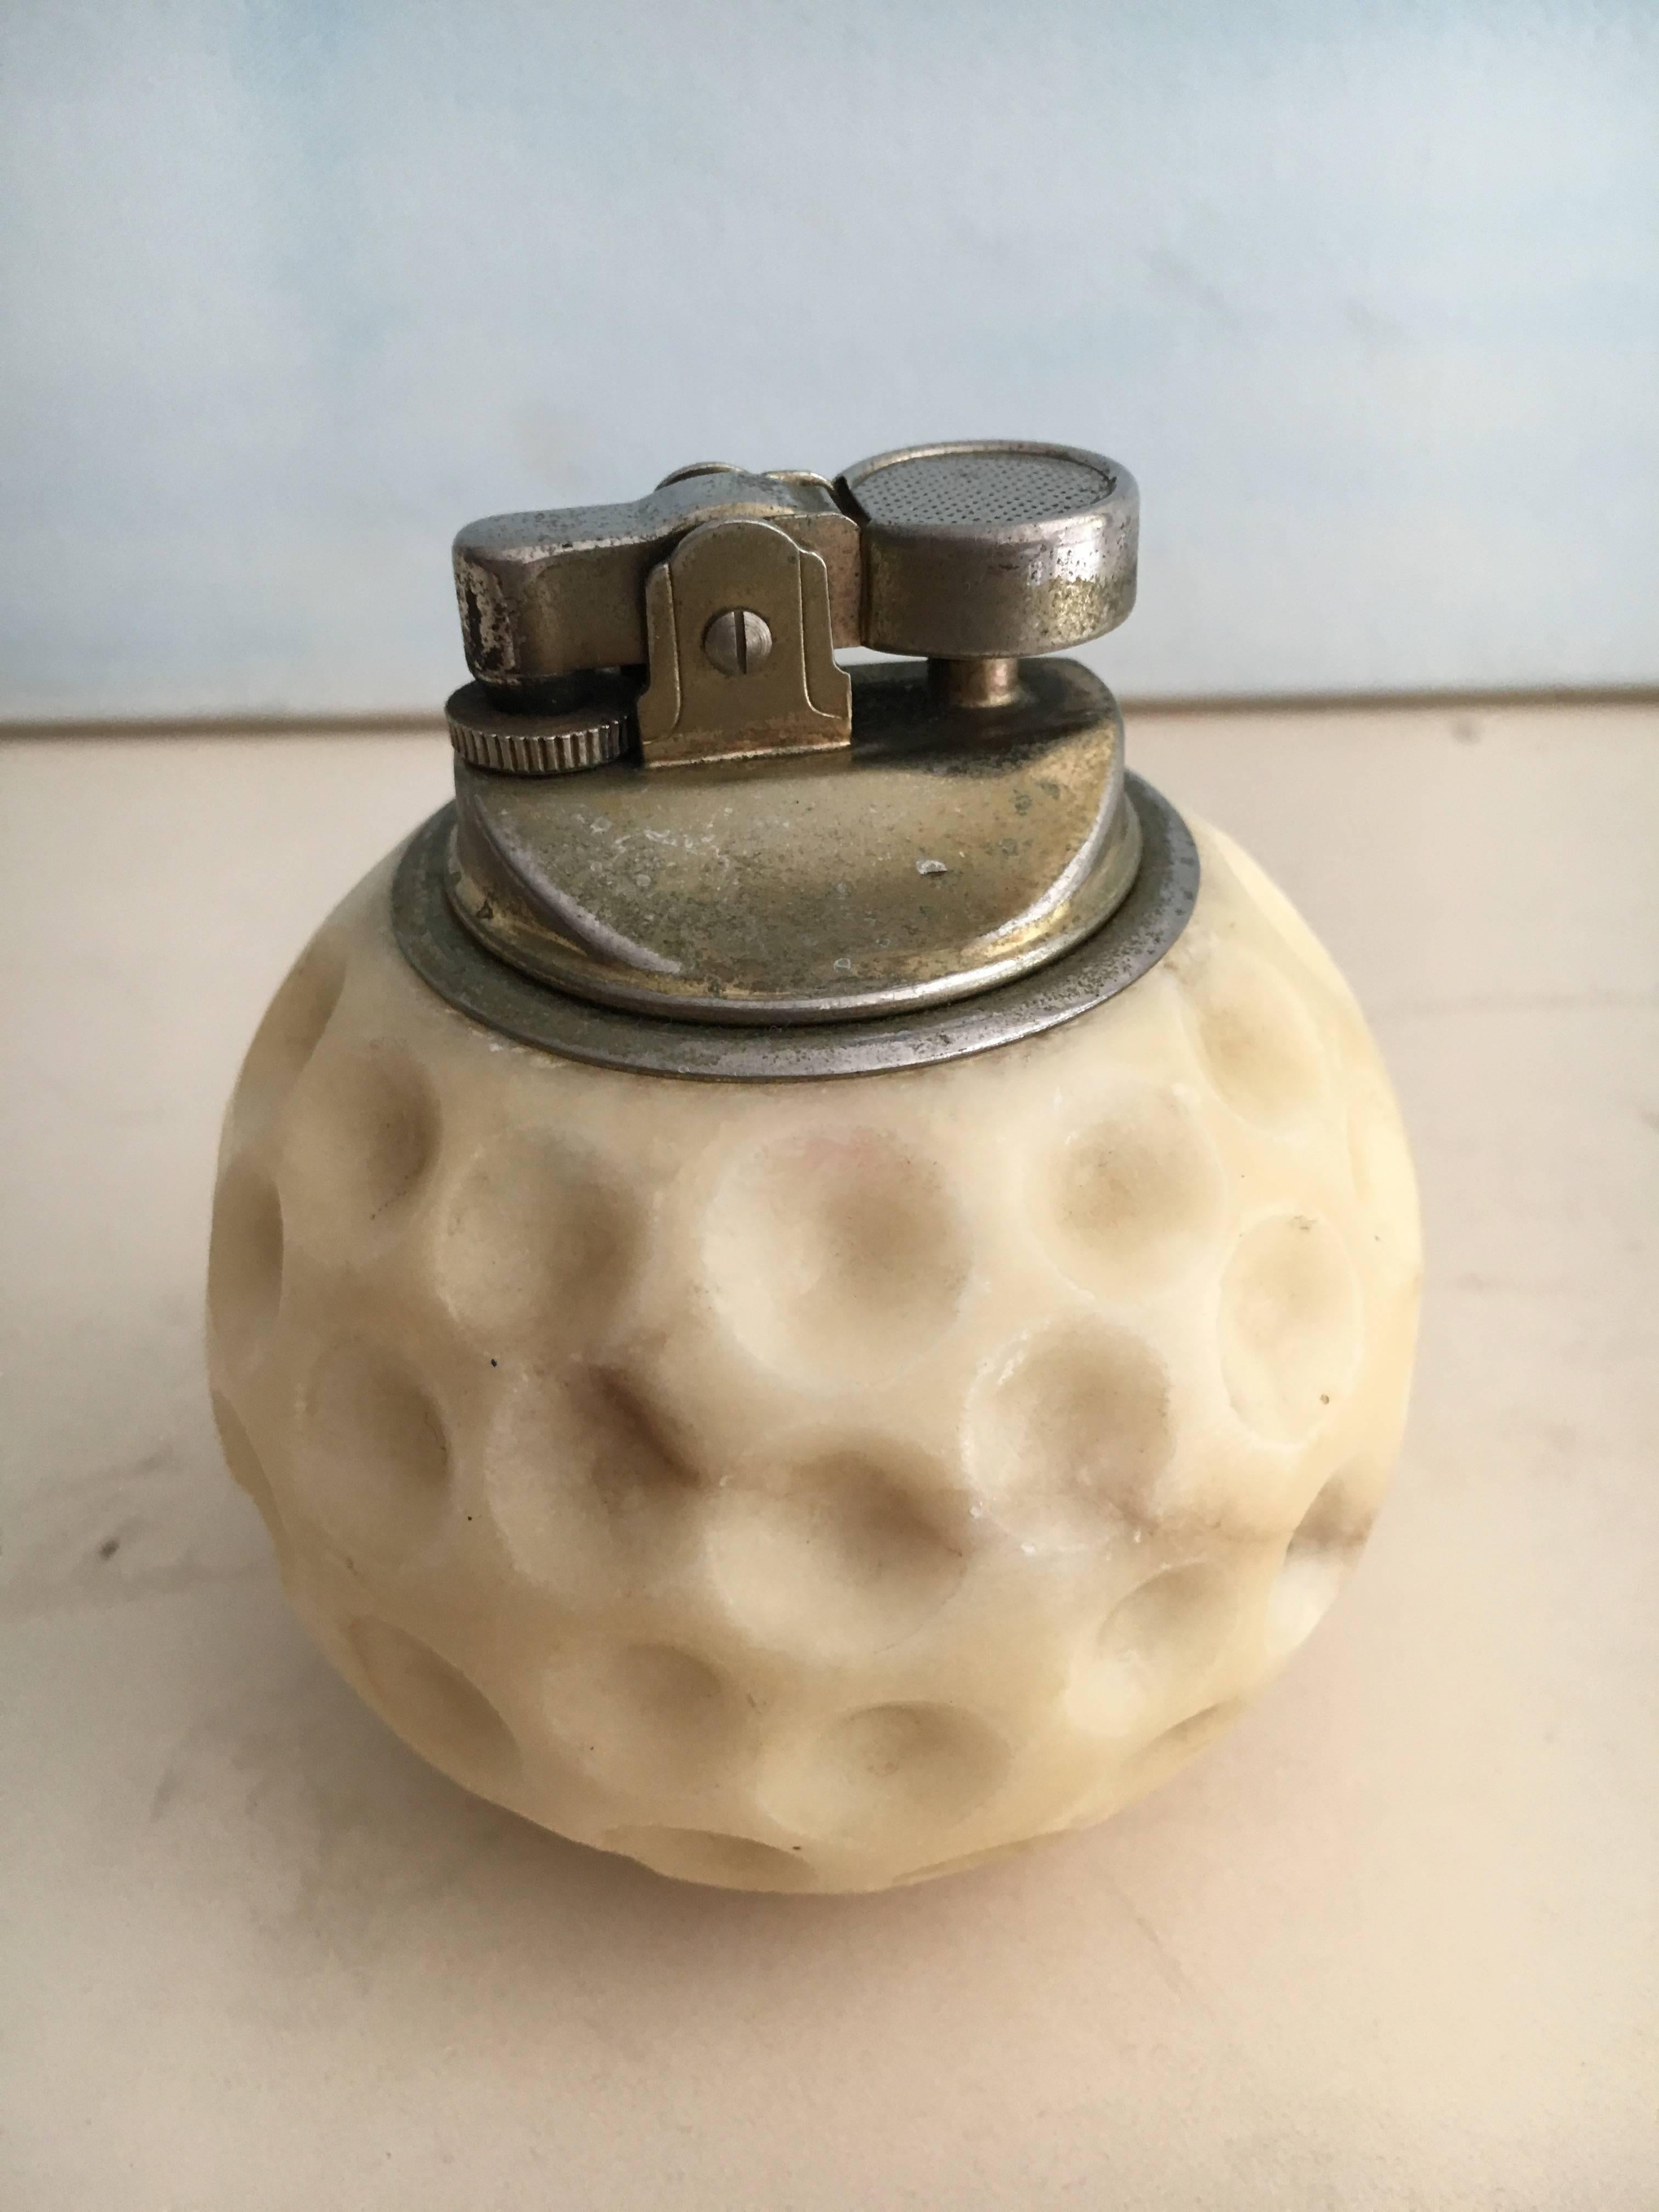 Vintage marble golf ball 420 cigarette lighter, perfect for the office or opium den!

Play 18 holes and then, relax!

See Darren Ransdell designs other great golf pieces on the site.